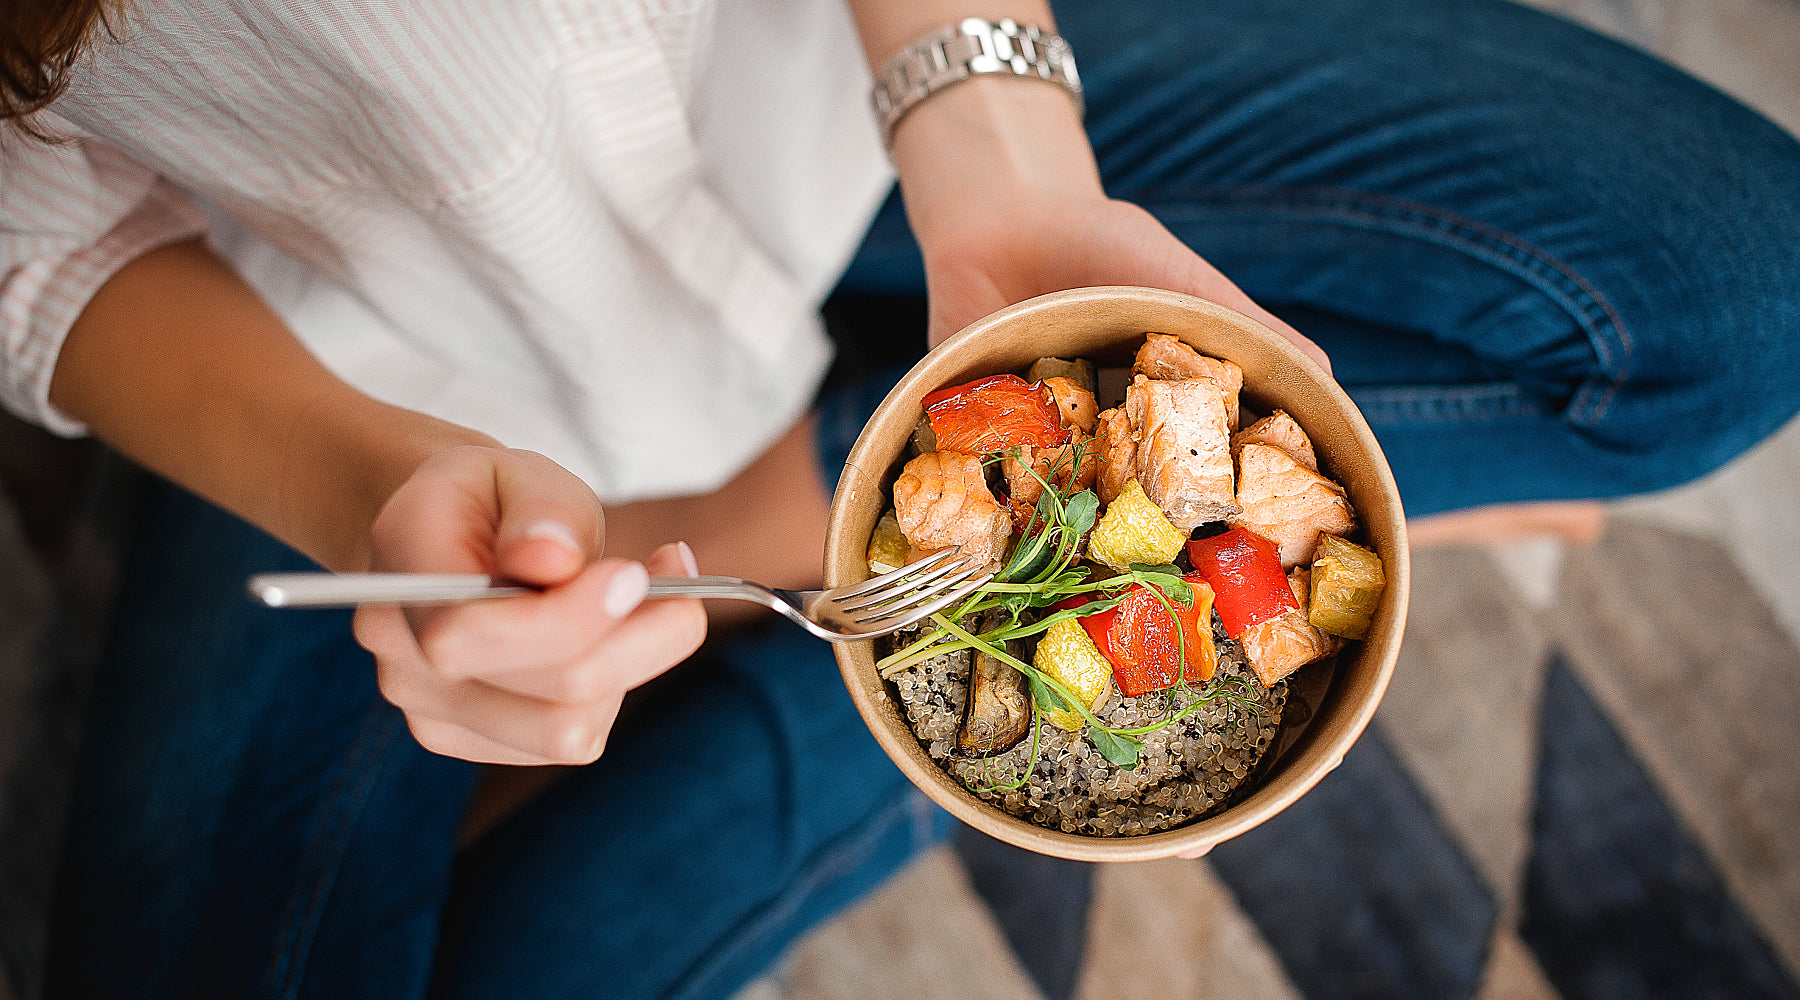 Woman sitting on the floor holding a healthy whole food meal in a bowl.